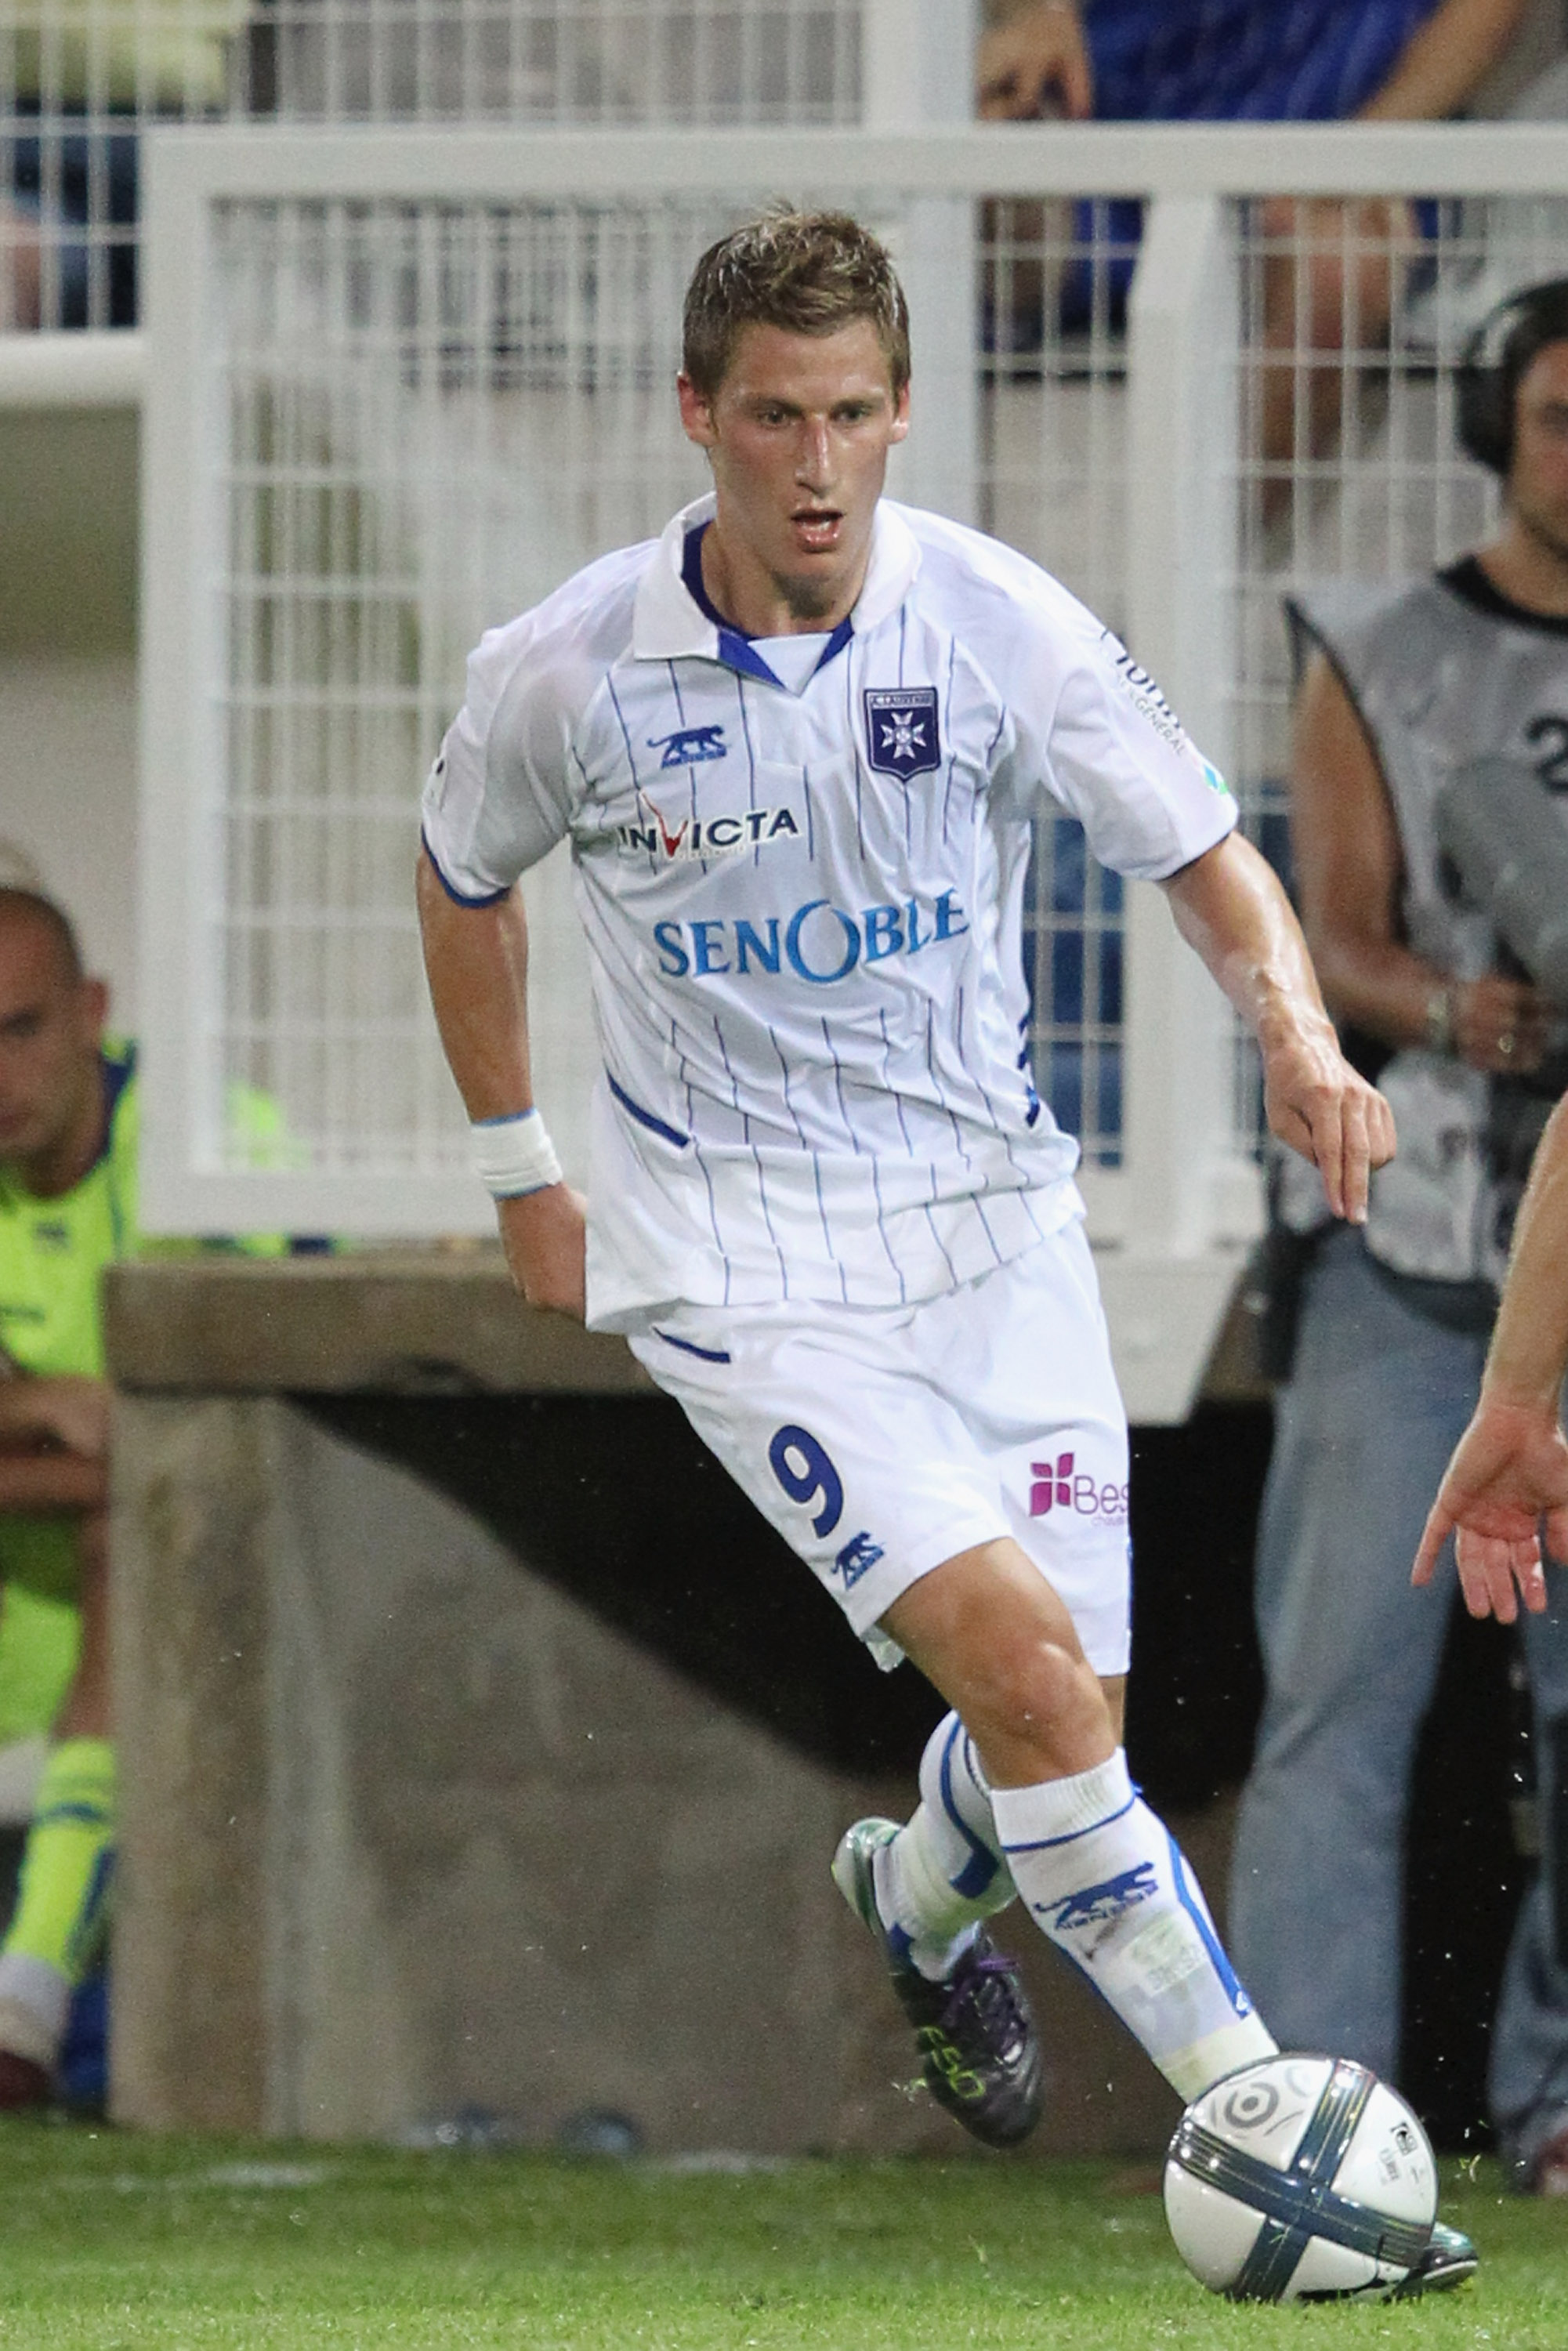 AUXERRE, FRANCE - AUGUST 07:  Valter Birsa of Auxerre in action during the Ligue 1 match between Auxerre and Lorient at Abbe-Deschamp Stadium on August 7, 2010 in Auxerre, France.  (Photo by Julien M. Hekimian/Getty Images)